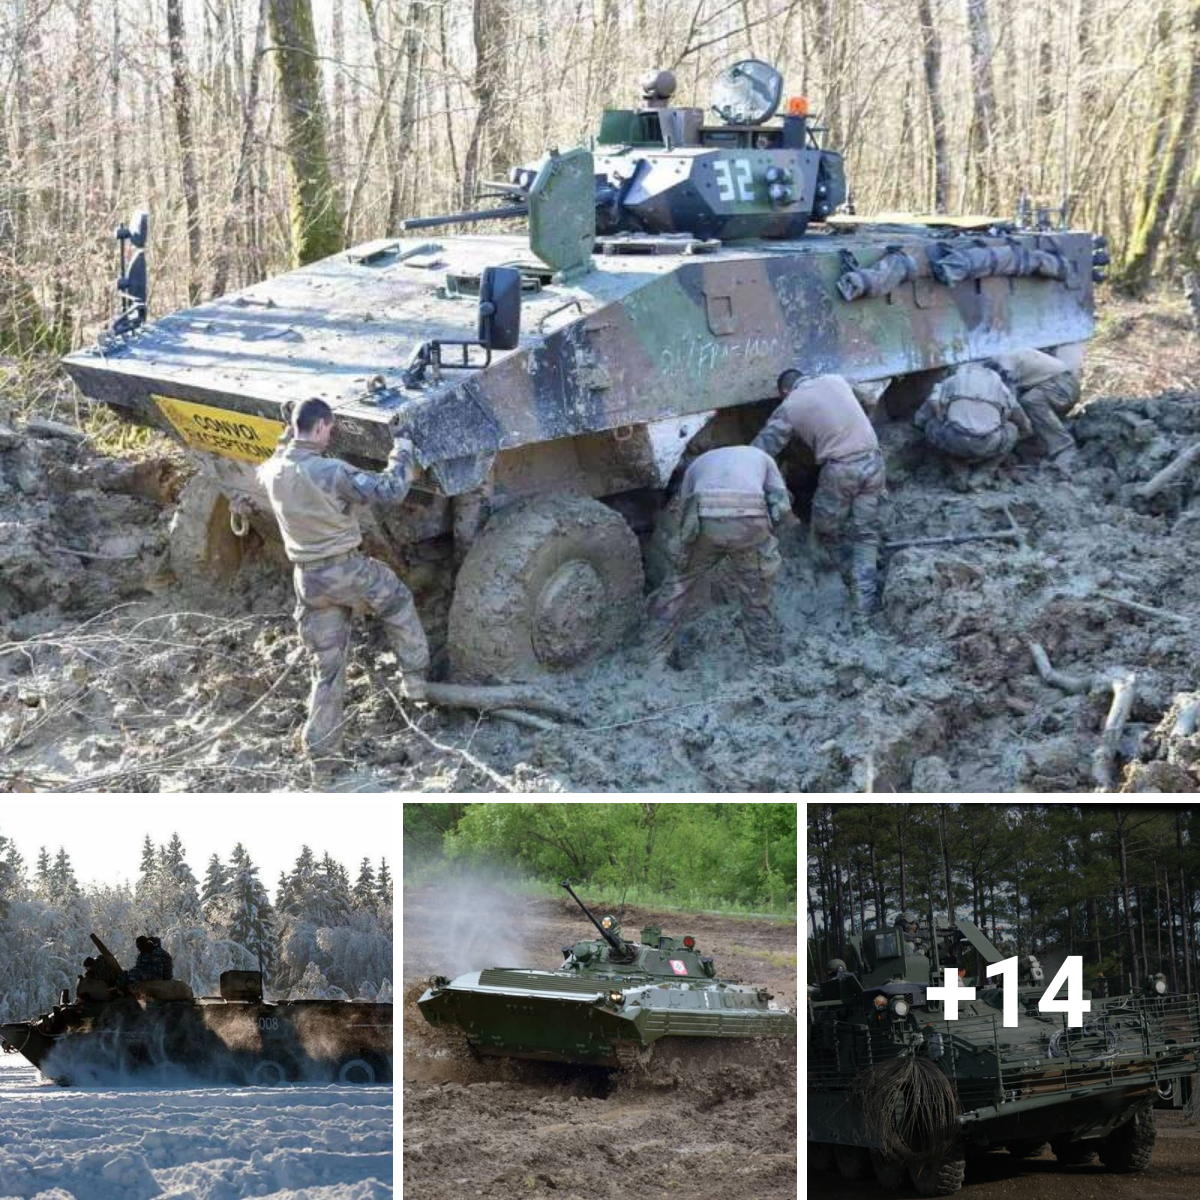 Wheeled armored vehicles versus tracked vehicles for navigating deep snow and swamps? Felines